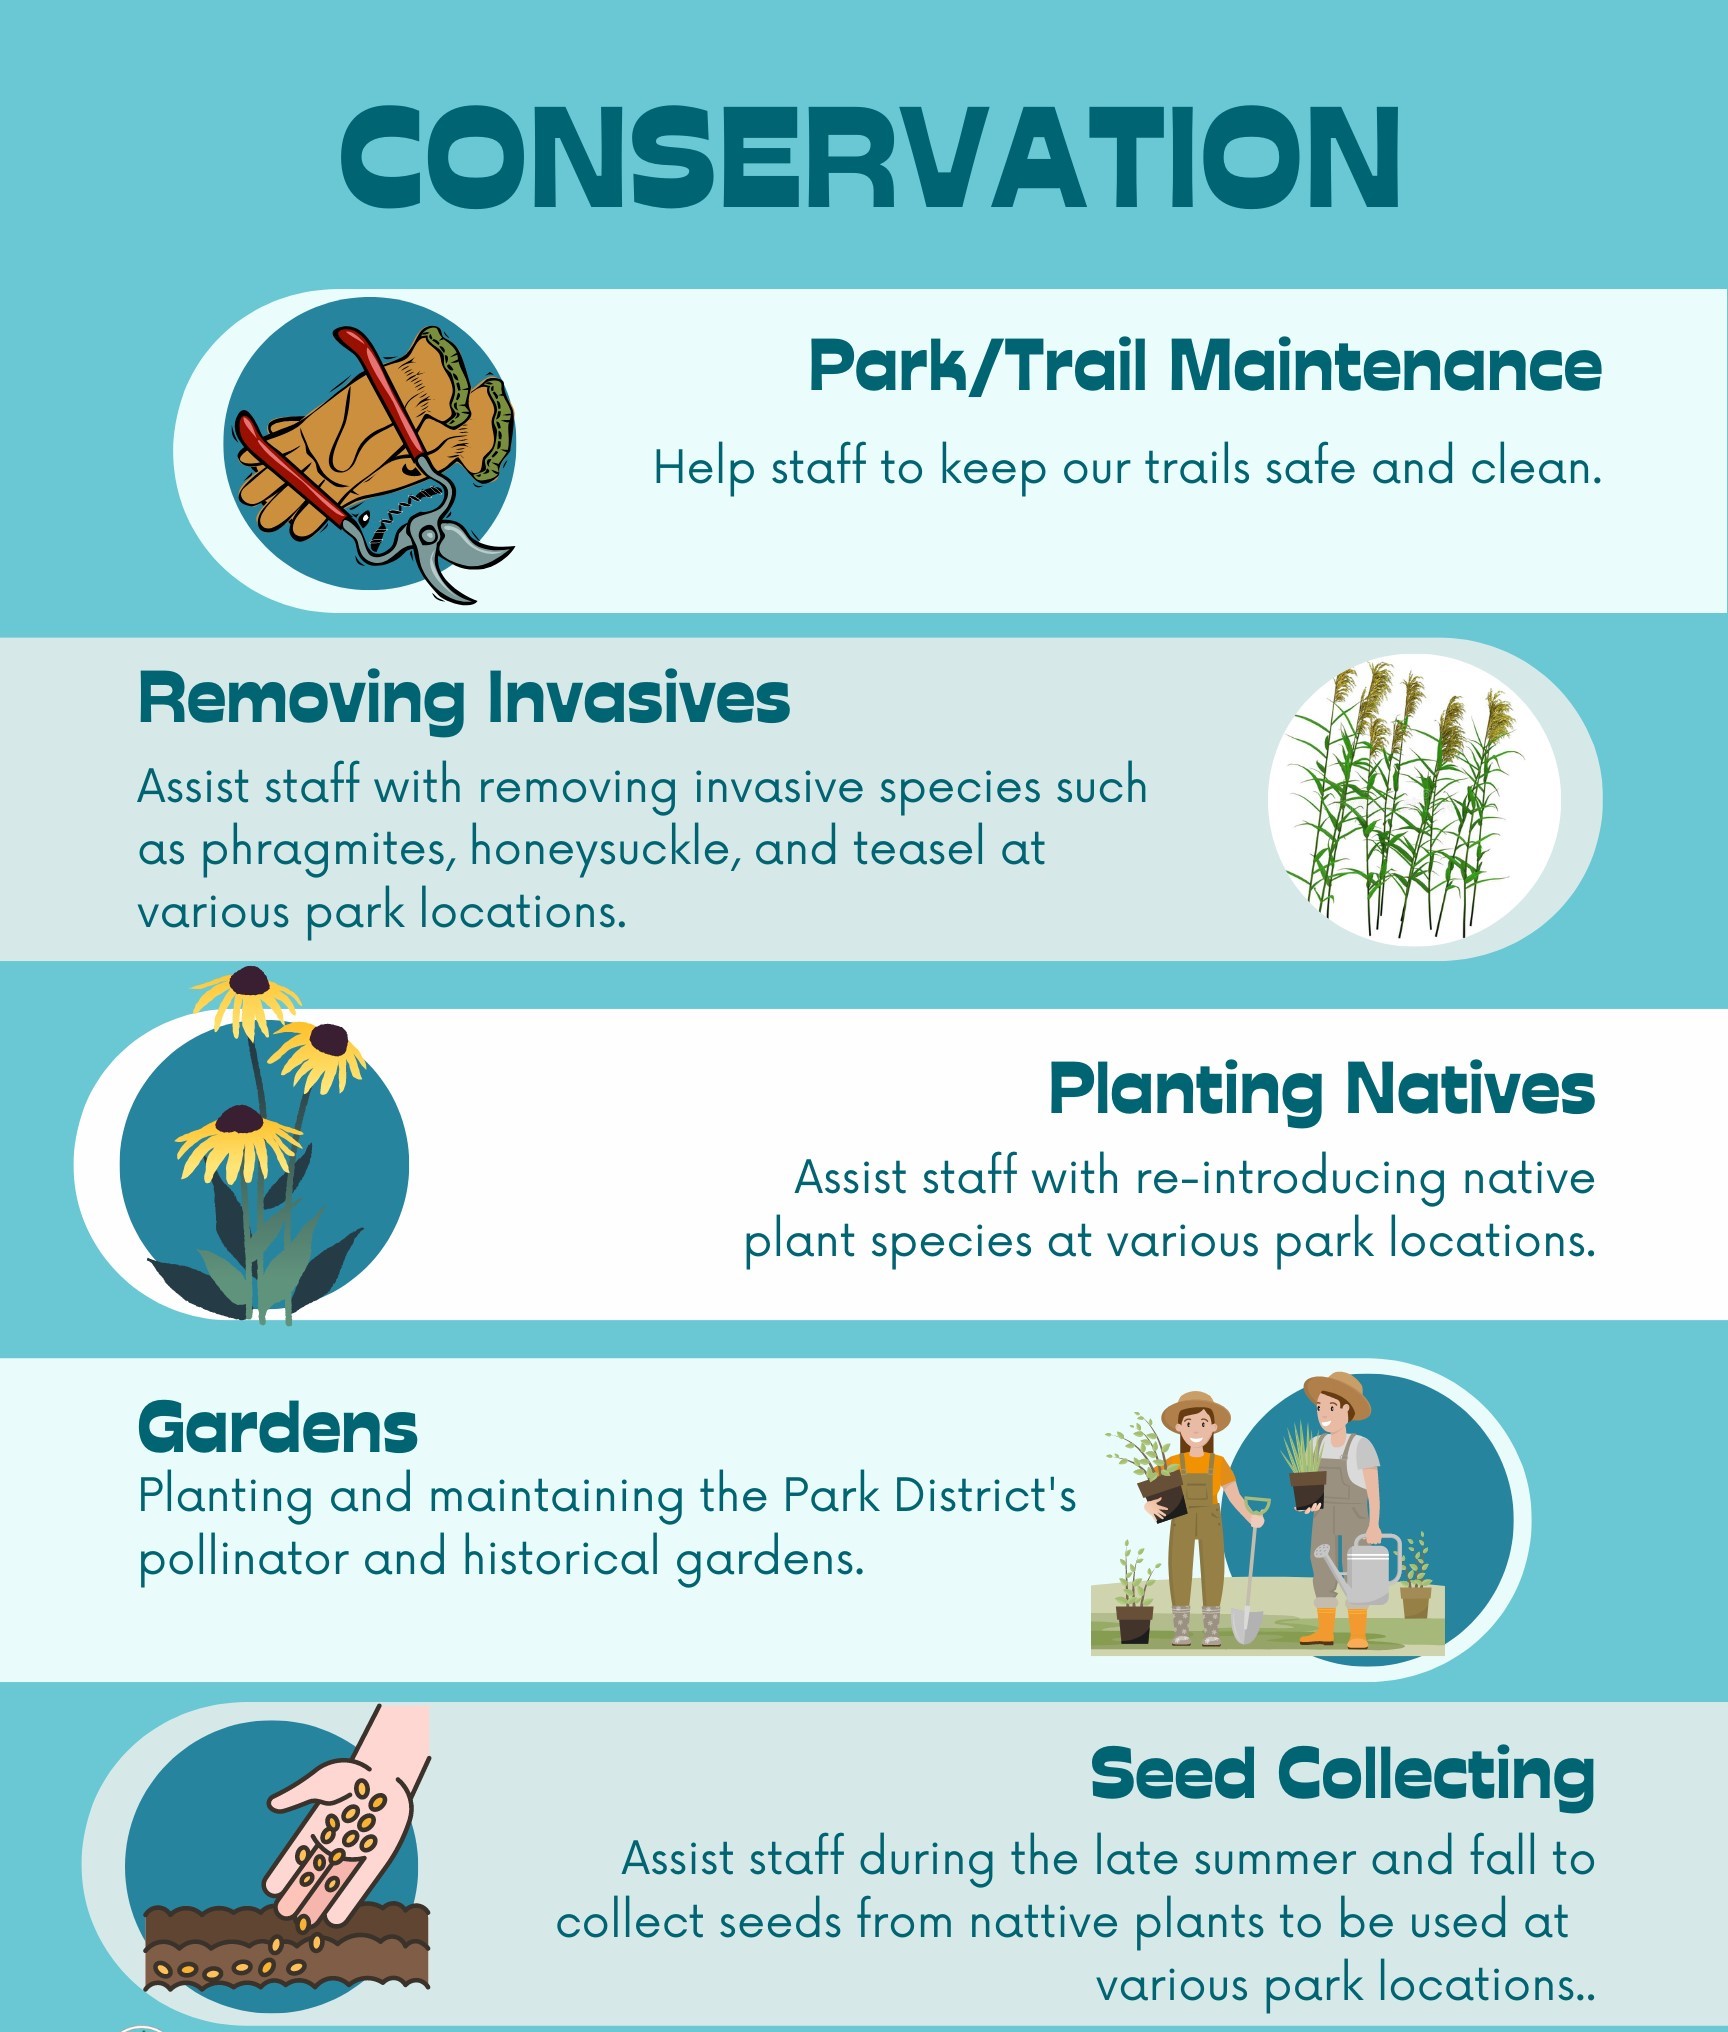 conservation opportunities